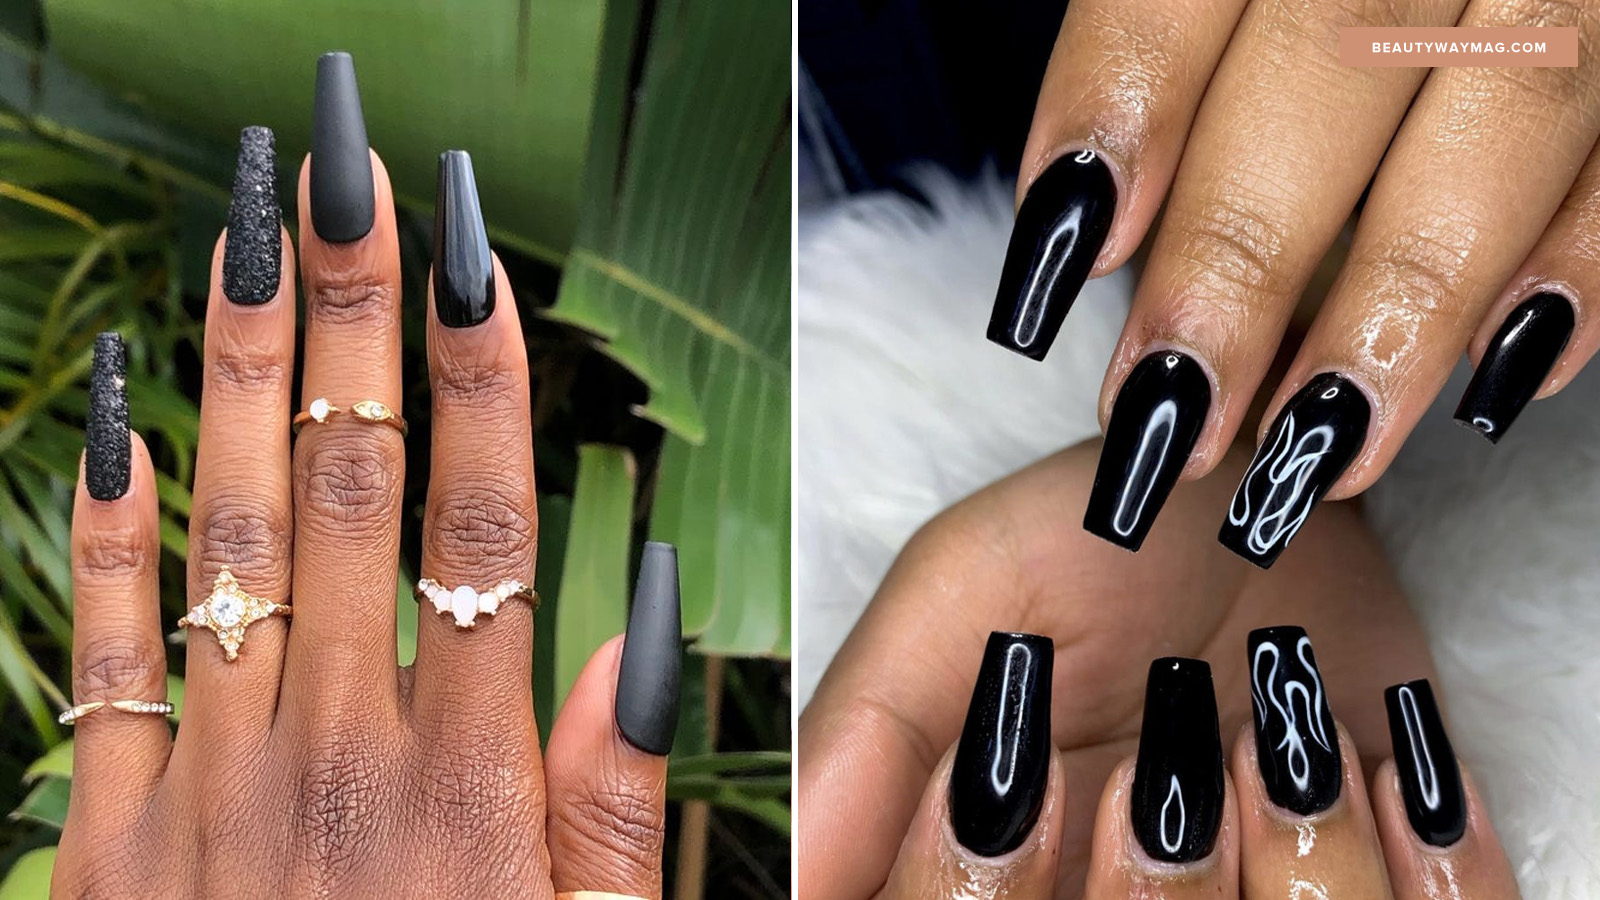 1. Black Coffin Nails: 21 Ideas for Your Next Manicure - wide 6